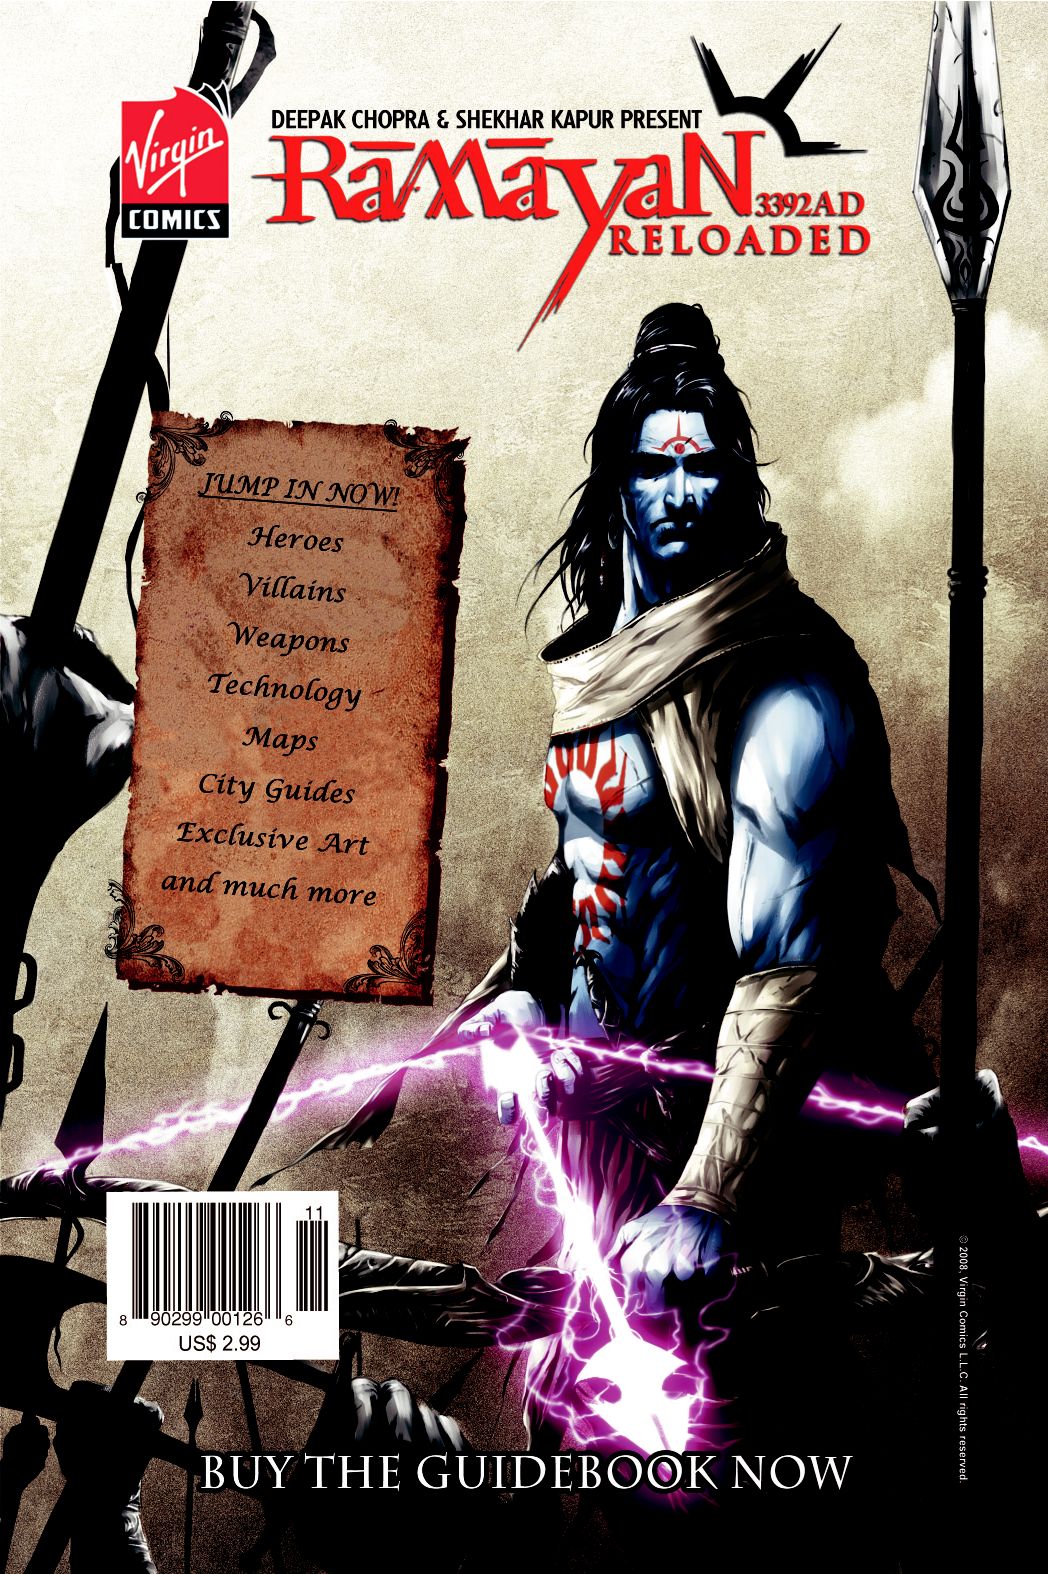 Read online Ramayan 3392 A.D. Reloaded comic -  Issue #6 - 35